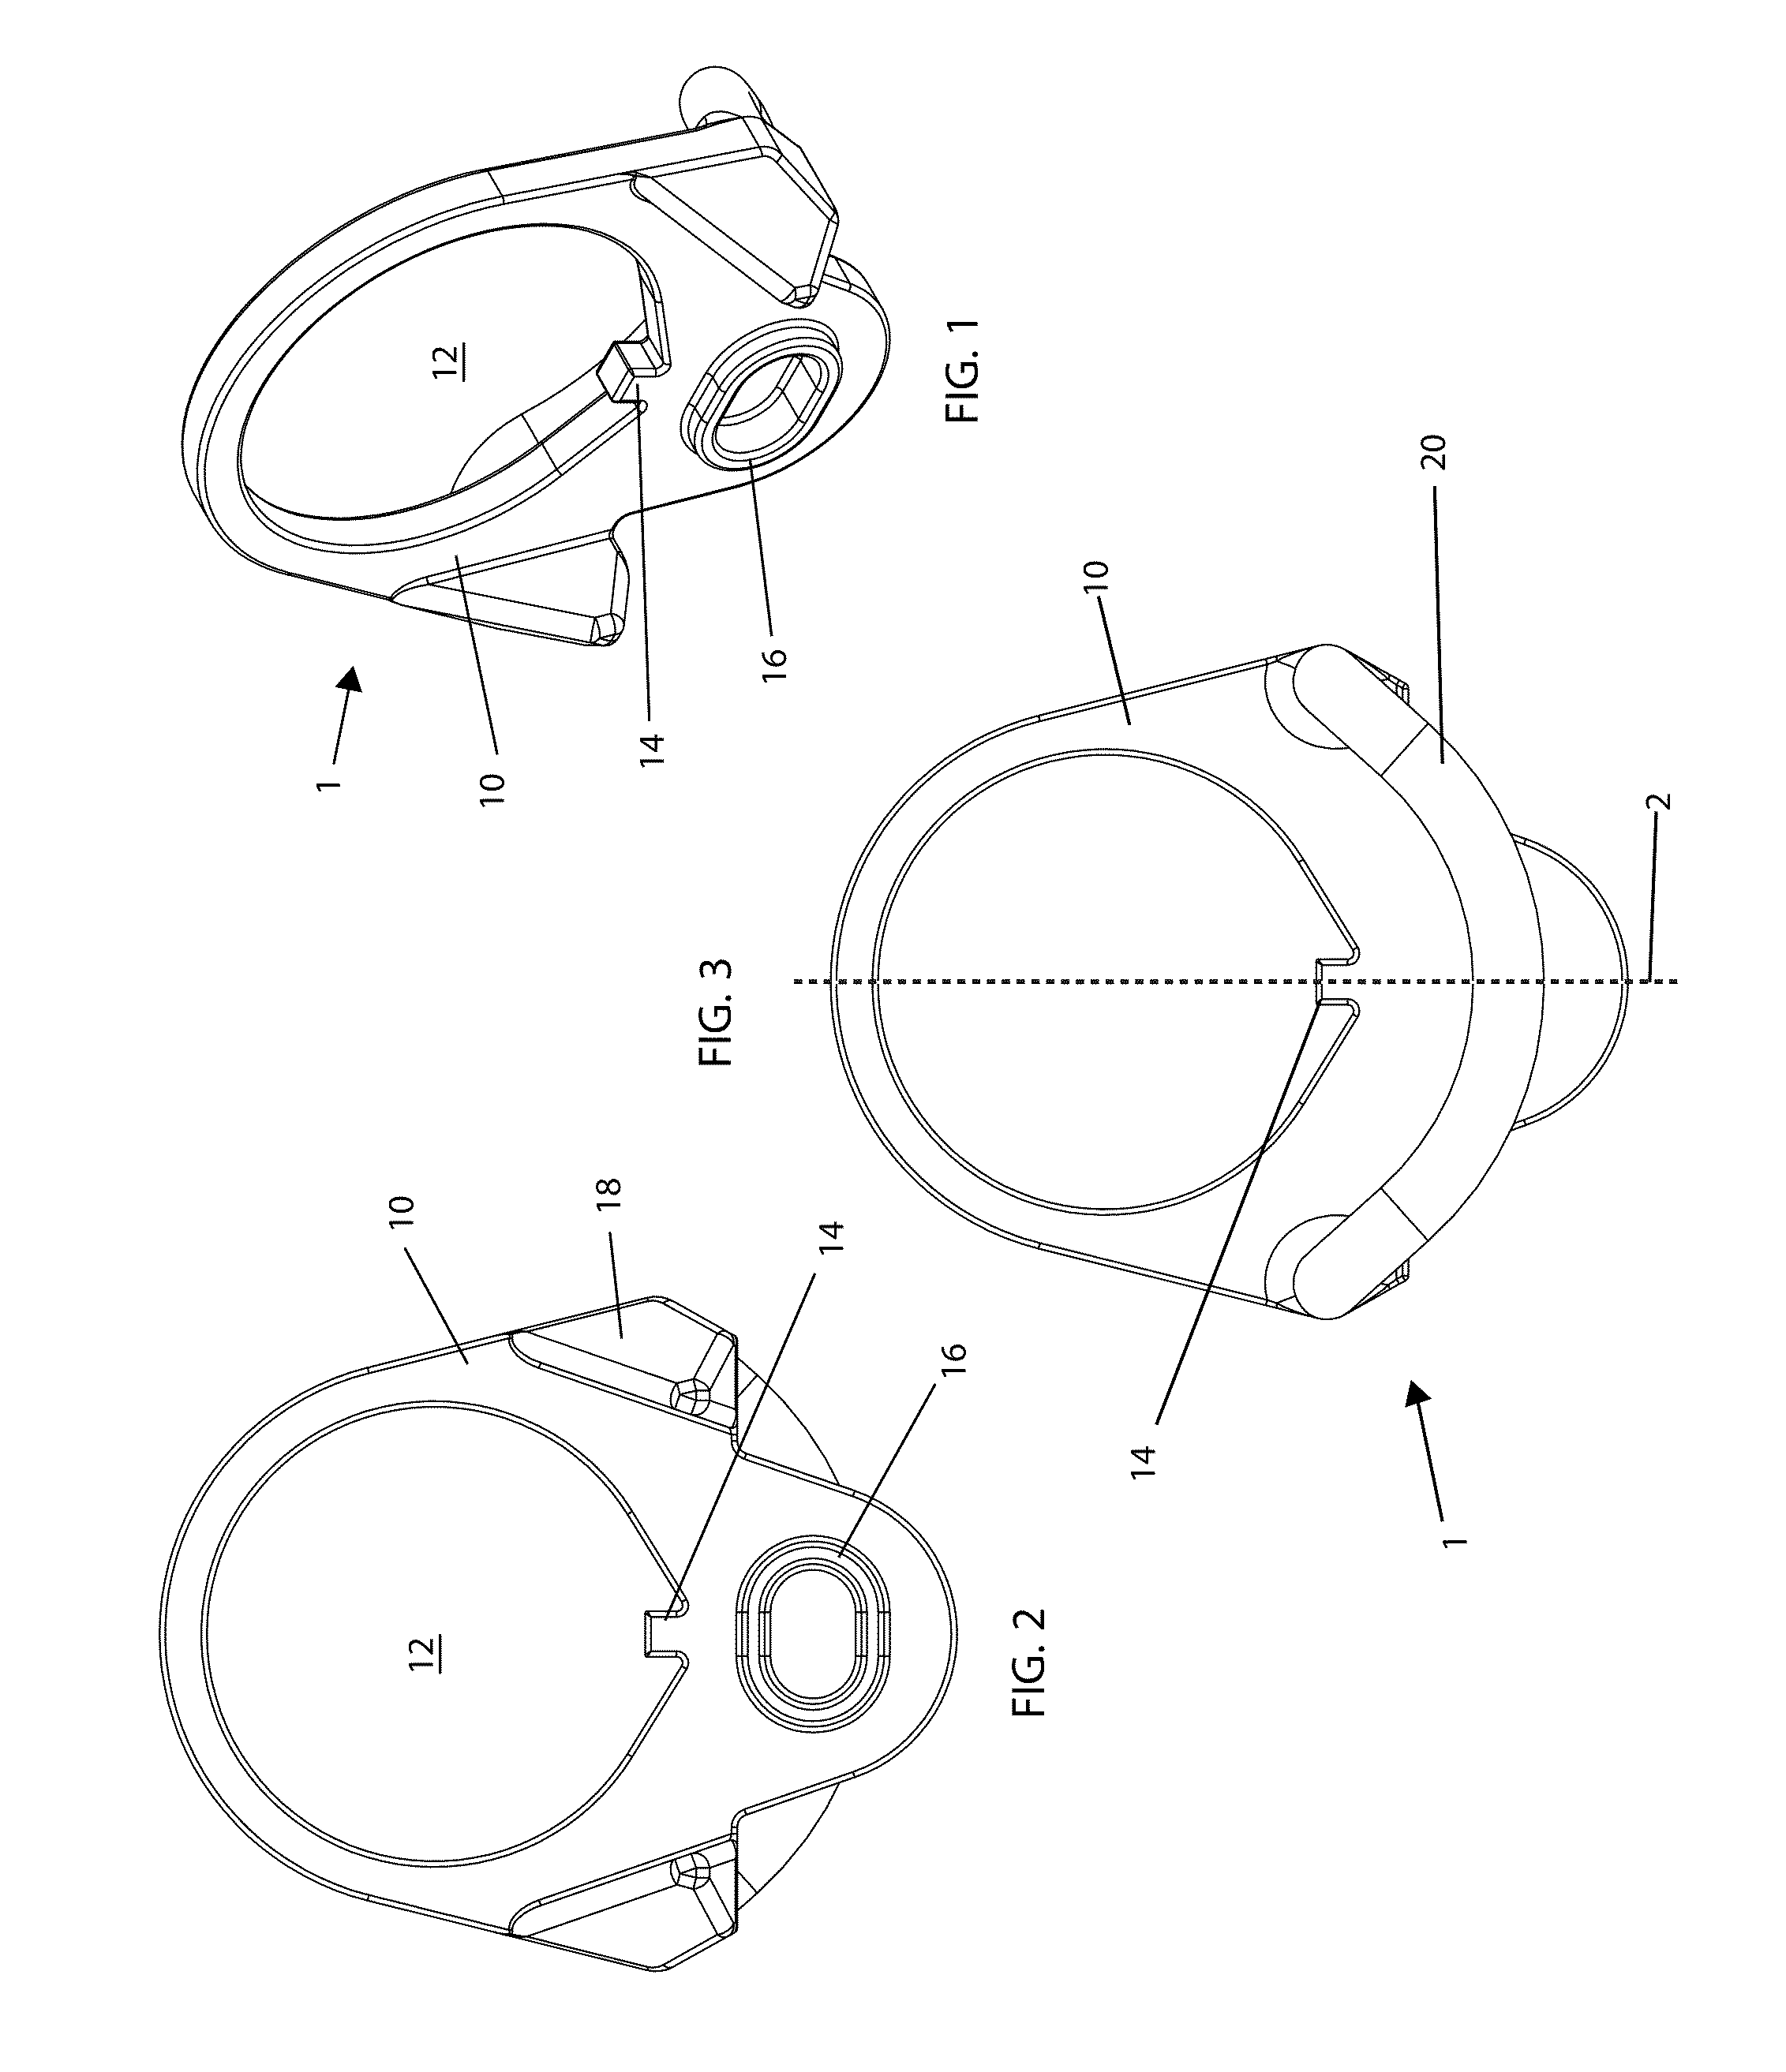 Sling Fittings and Sling System for a Firearm